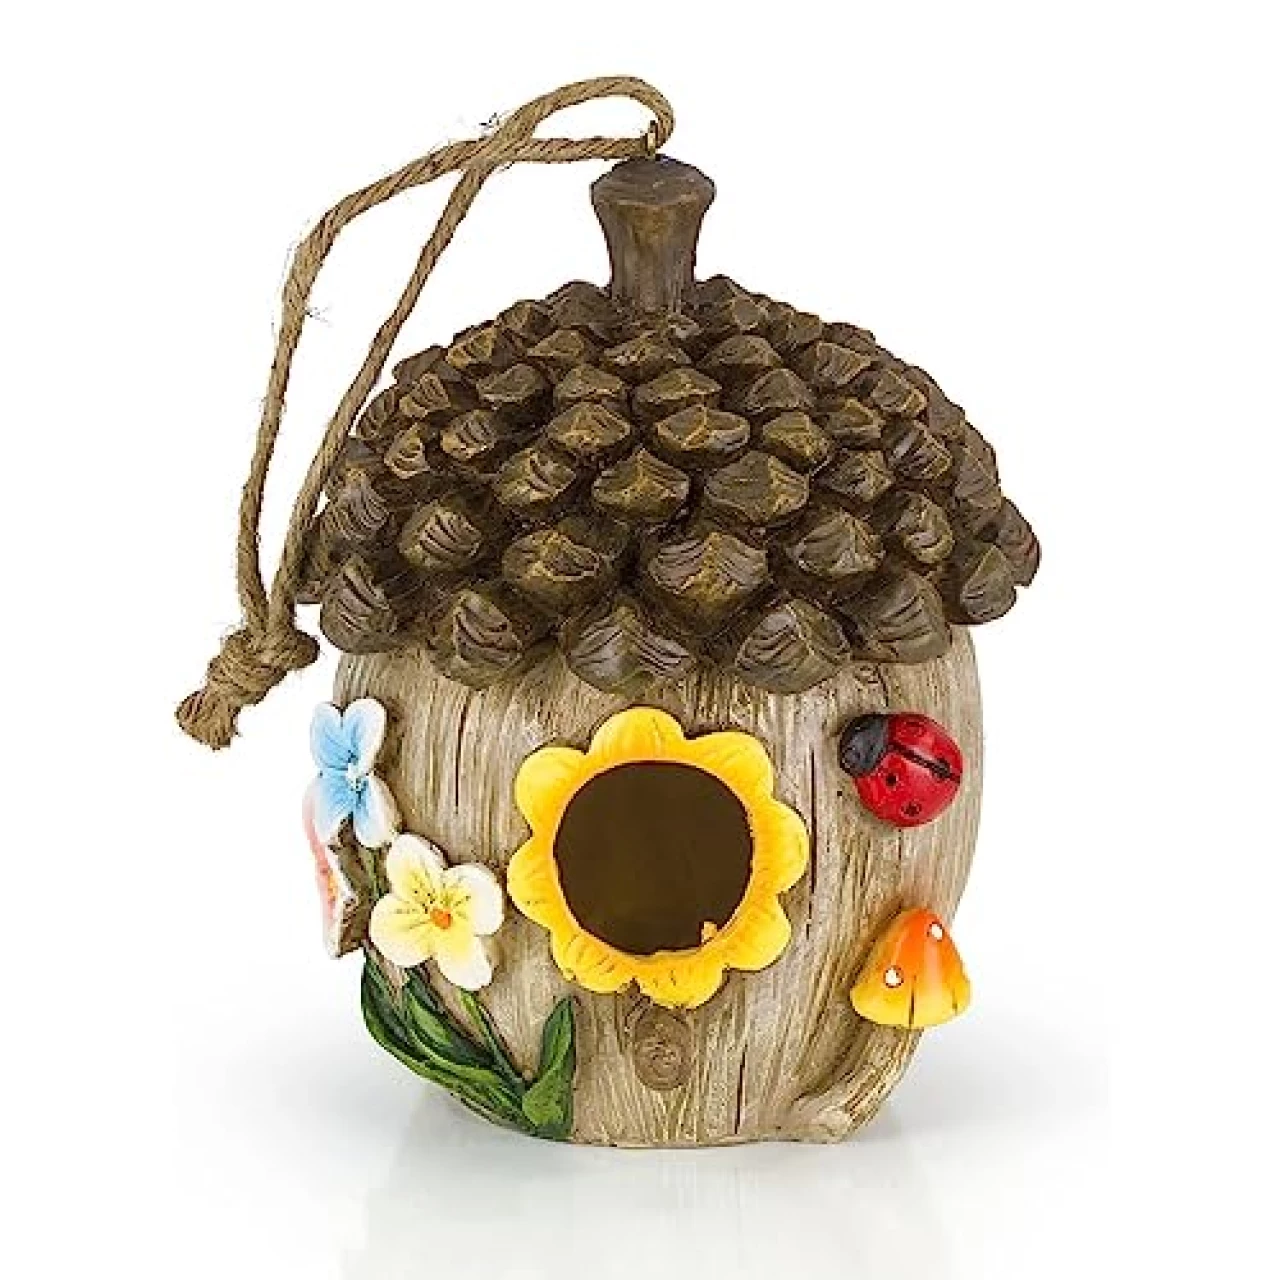 Dawhud Direct Hanging Bird Houses for Outside, Hand-Painted Bird Houses for Outdoors Decorative Birdhouses